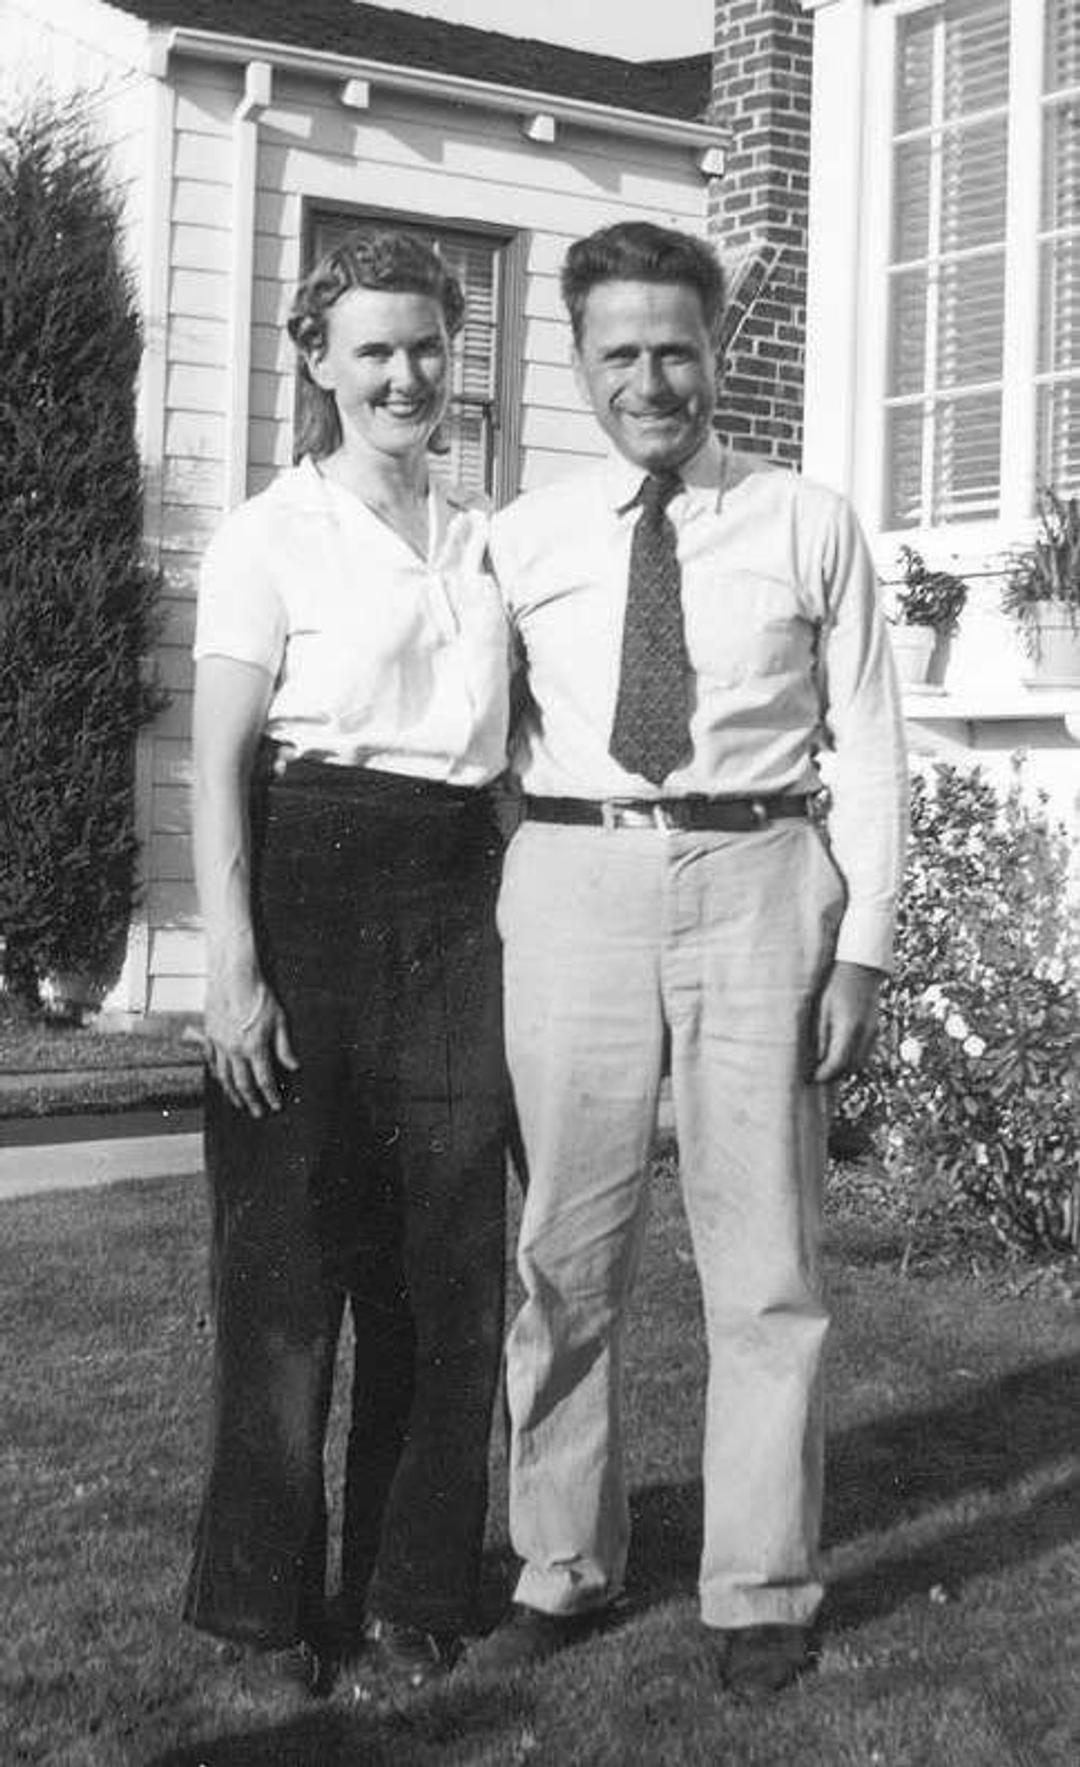 My mother and father in the mid-1940s.